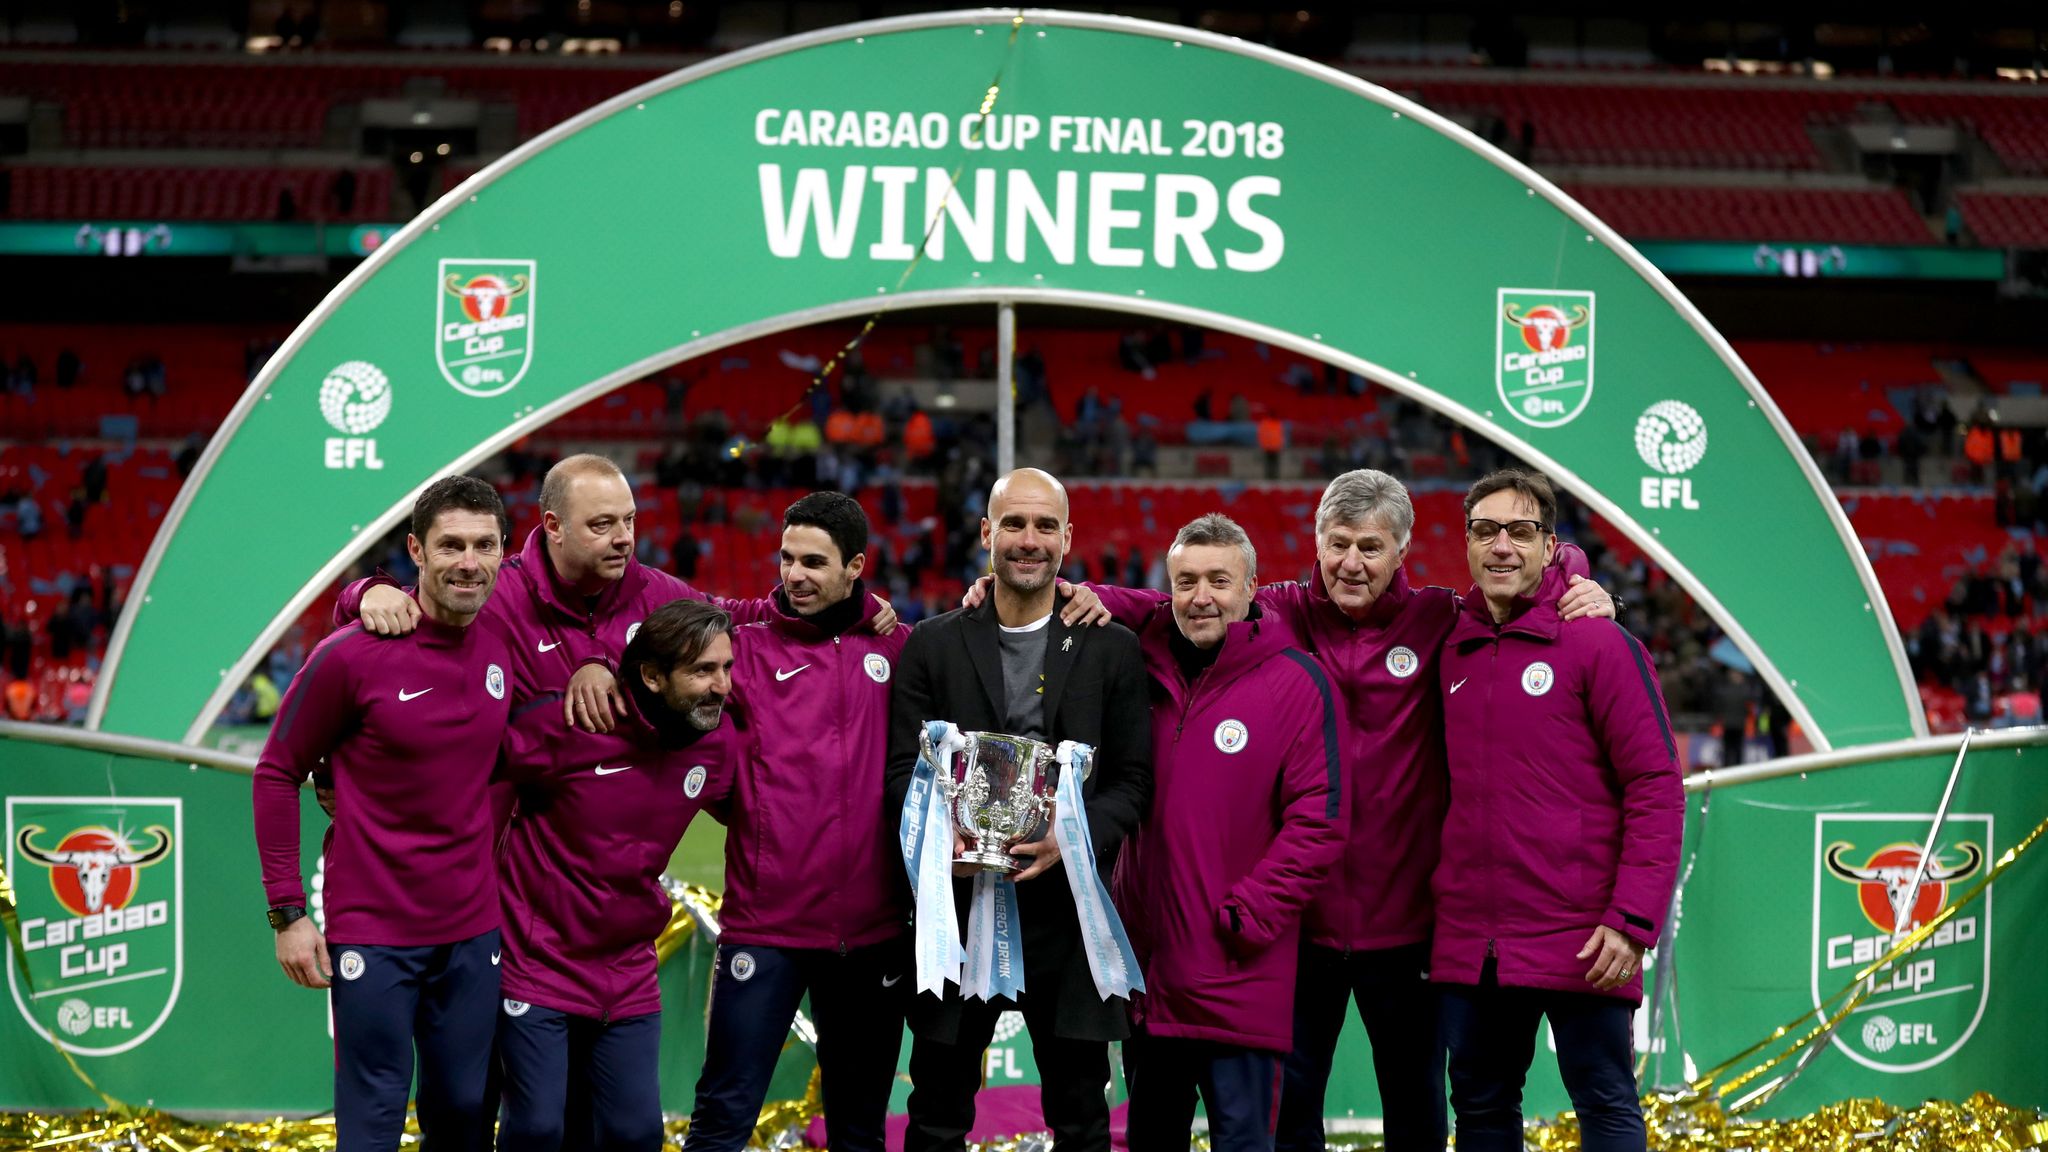 Carabao Cup victory is for Manchester City, says Pep Guardiola